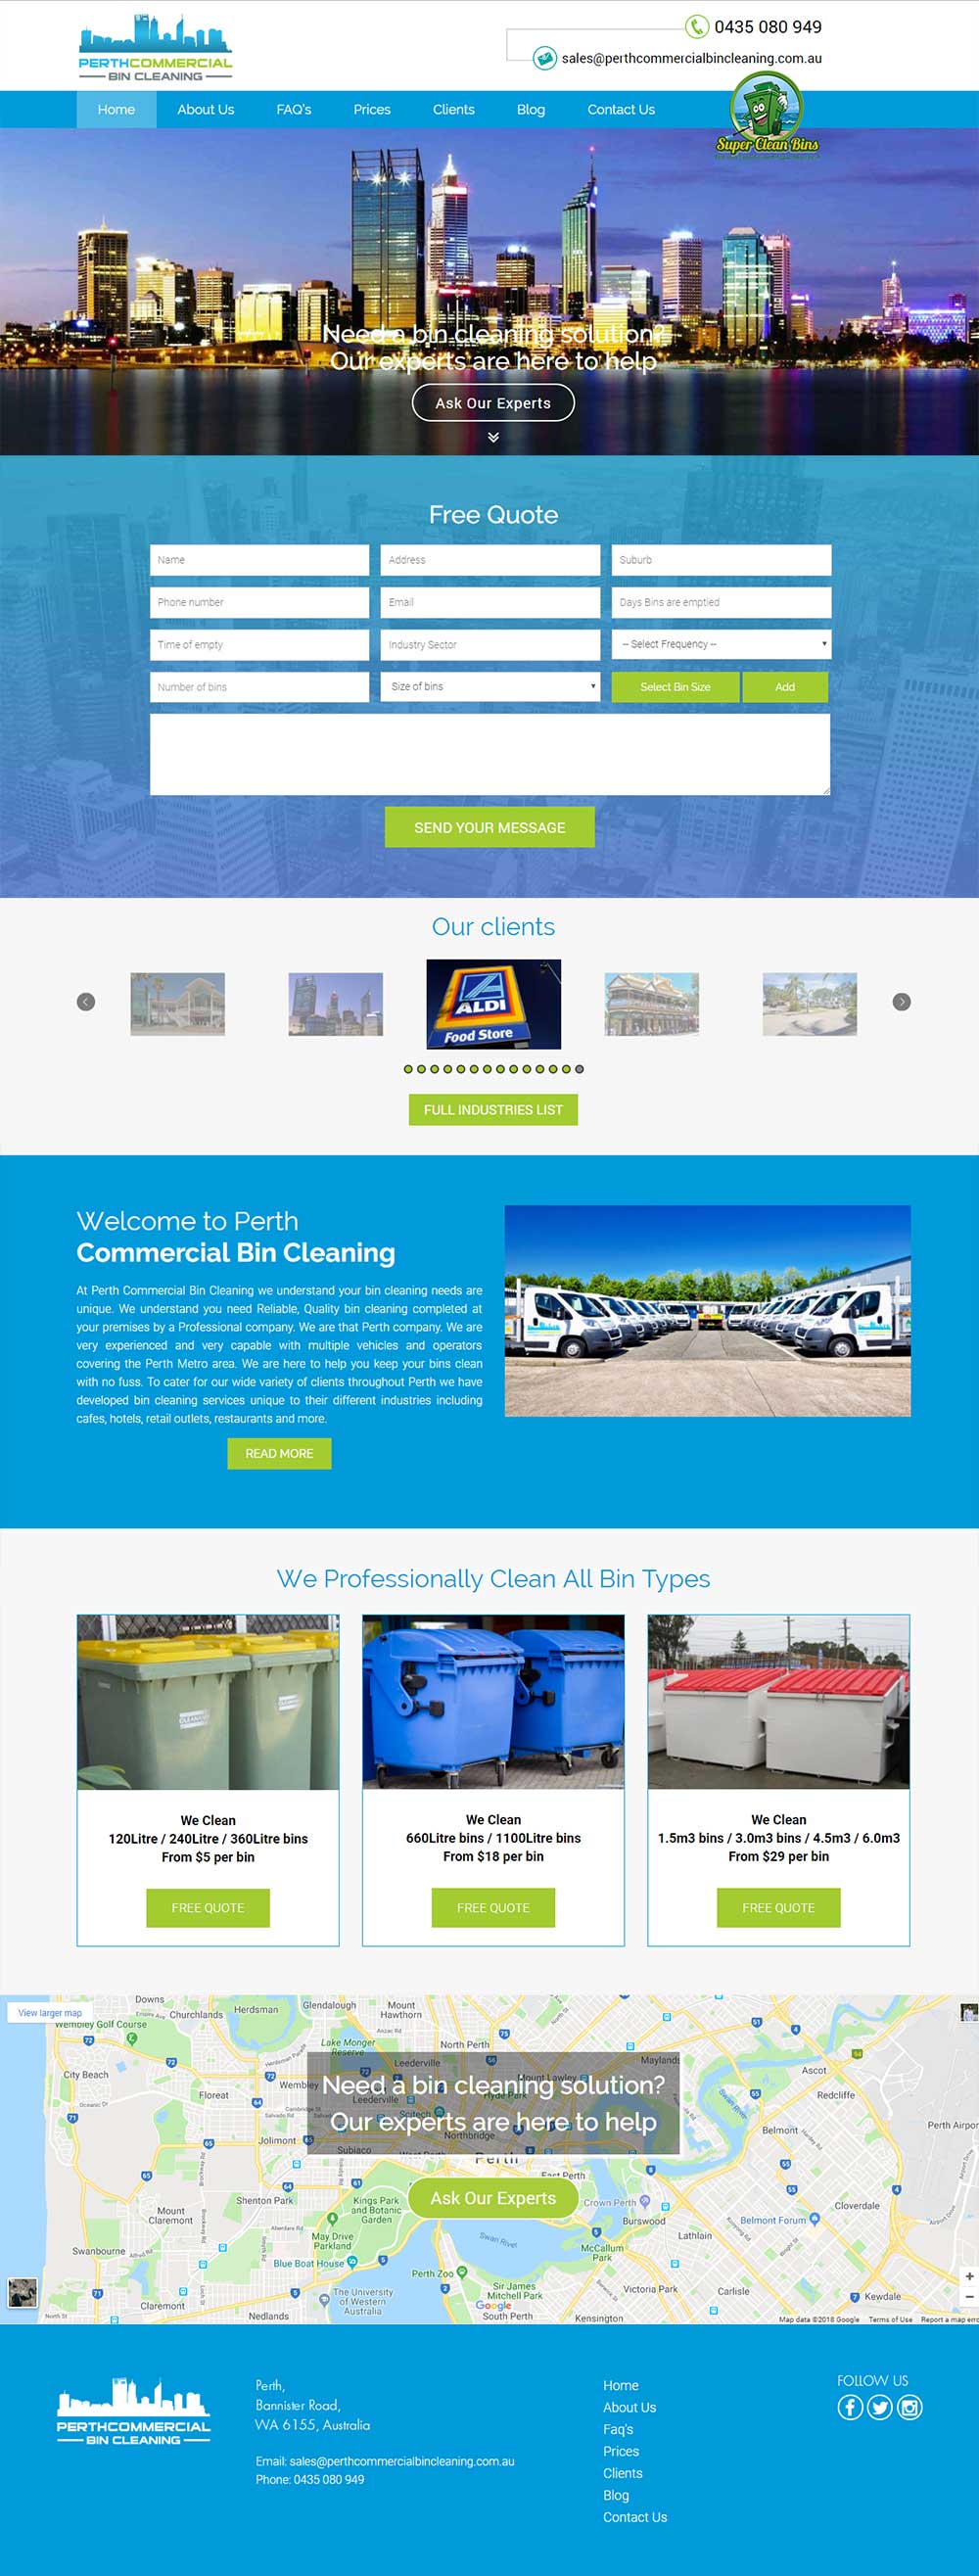 Perth Commercial Bin Cleaning